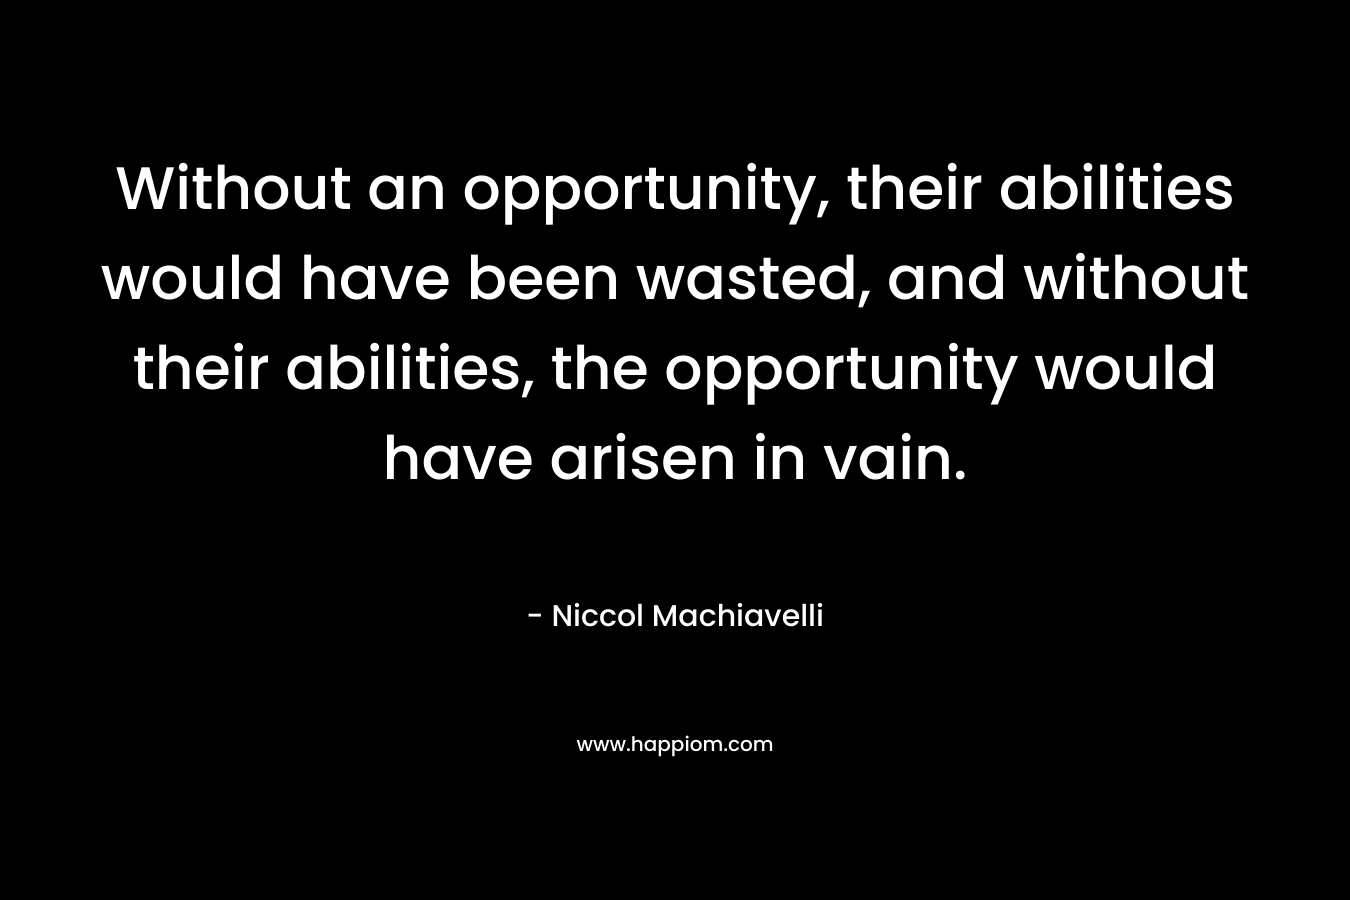 Without an opportunity, their abilities would have been wasted, and without their abilities, the opportunity would have arisen in vain. – Niccol Machiavelli